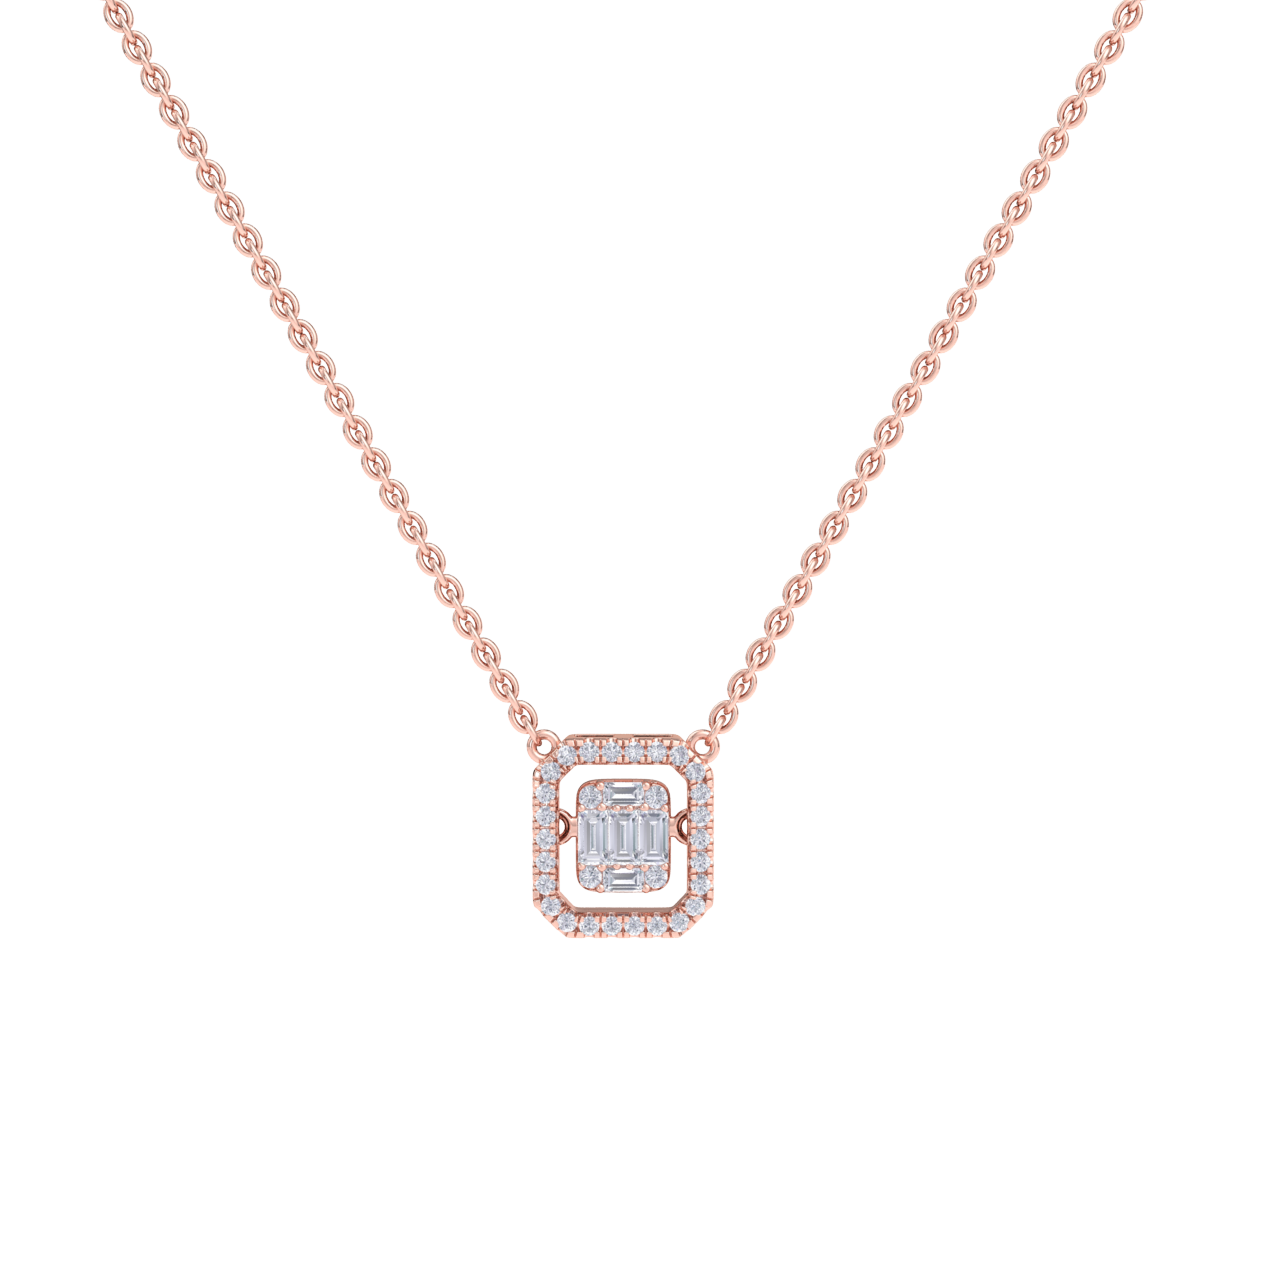 Square necklace in rose gold with white diamonds of 0.59 ct in weight